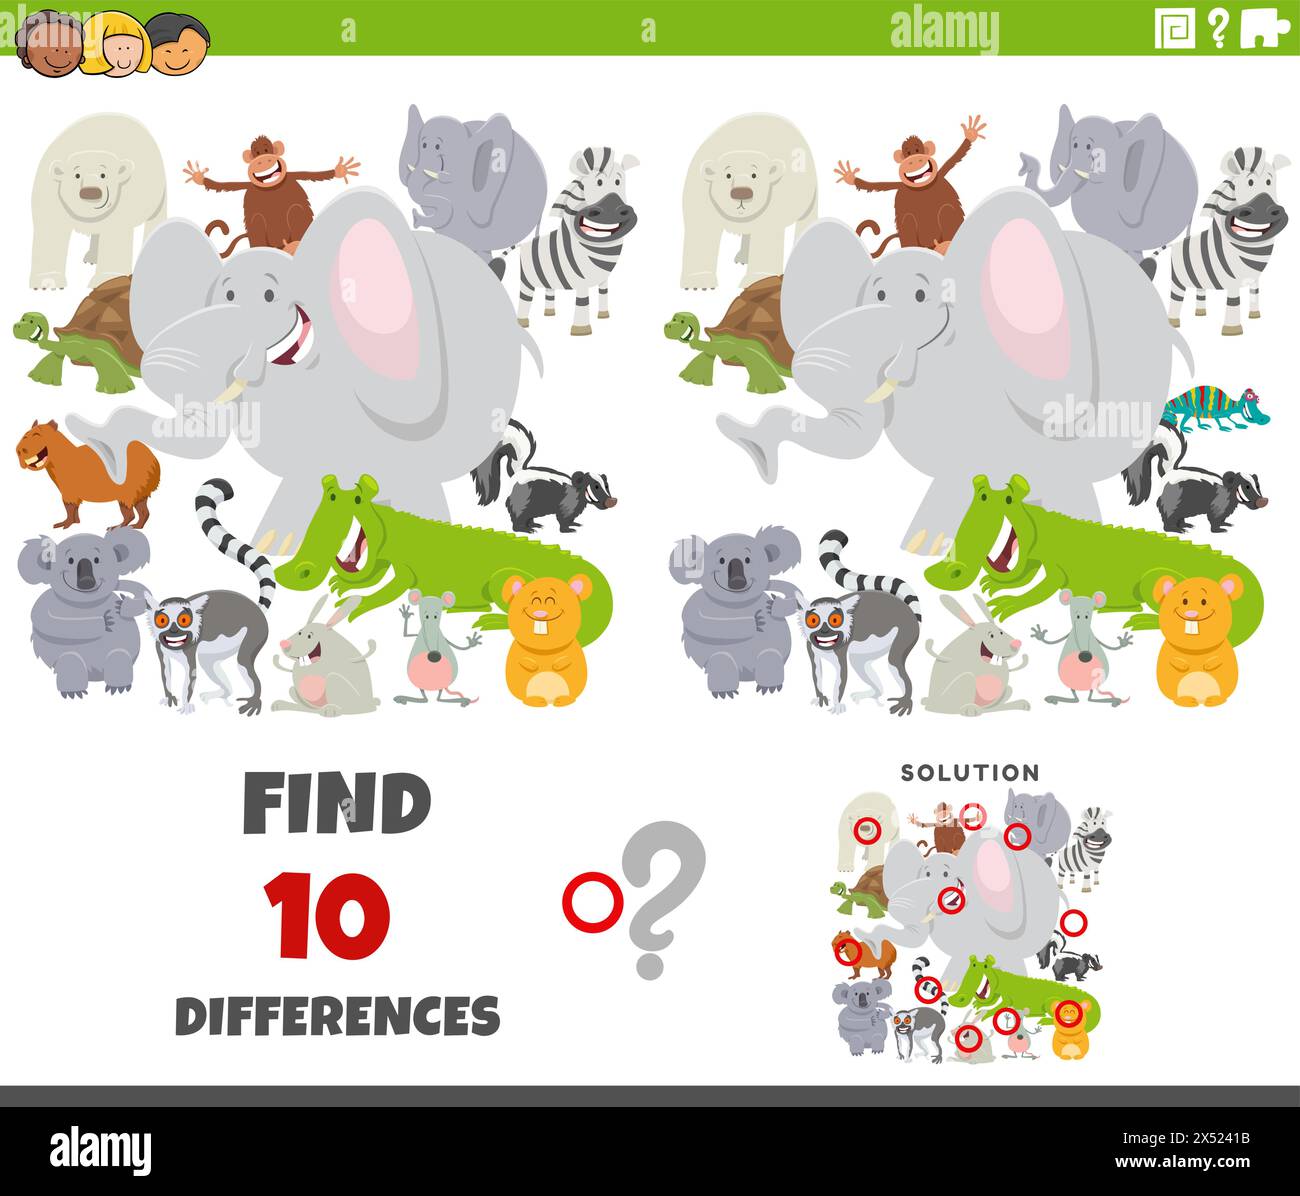 Cartoon illustration of finding the differences between pictures educational game with wild animal characters group Stock Vector